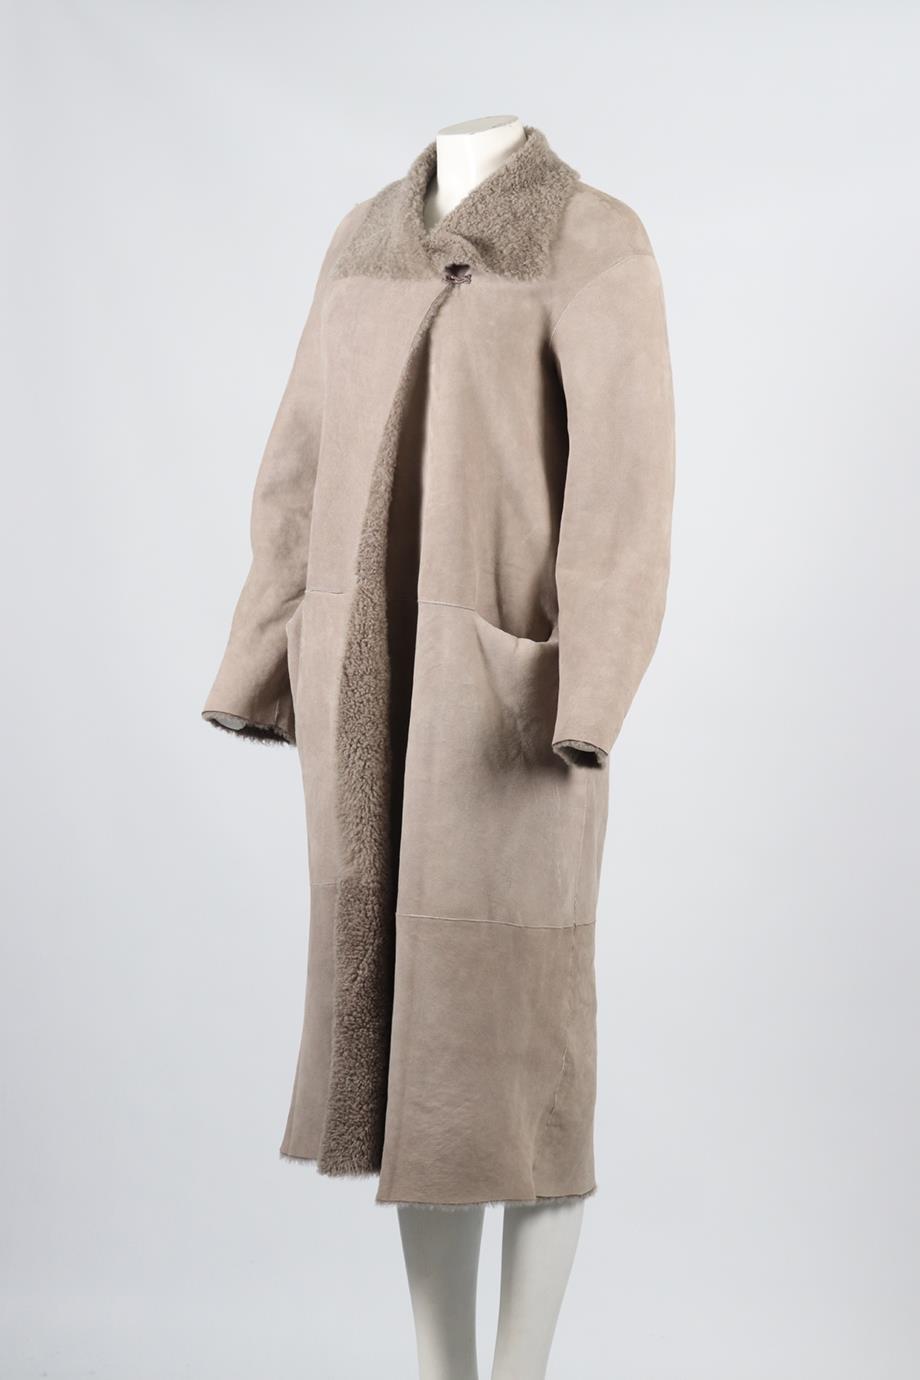 NOUR HAMMOUR REVERSIBLE SHEARLING AND SUEDE COAT FR 36 UK 8